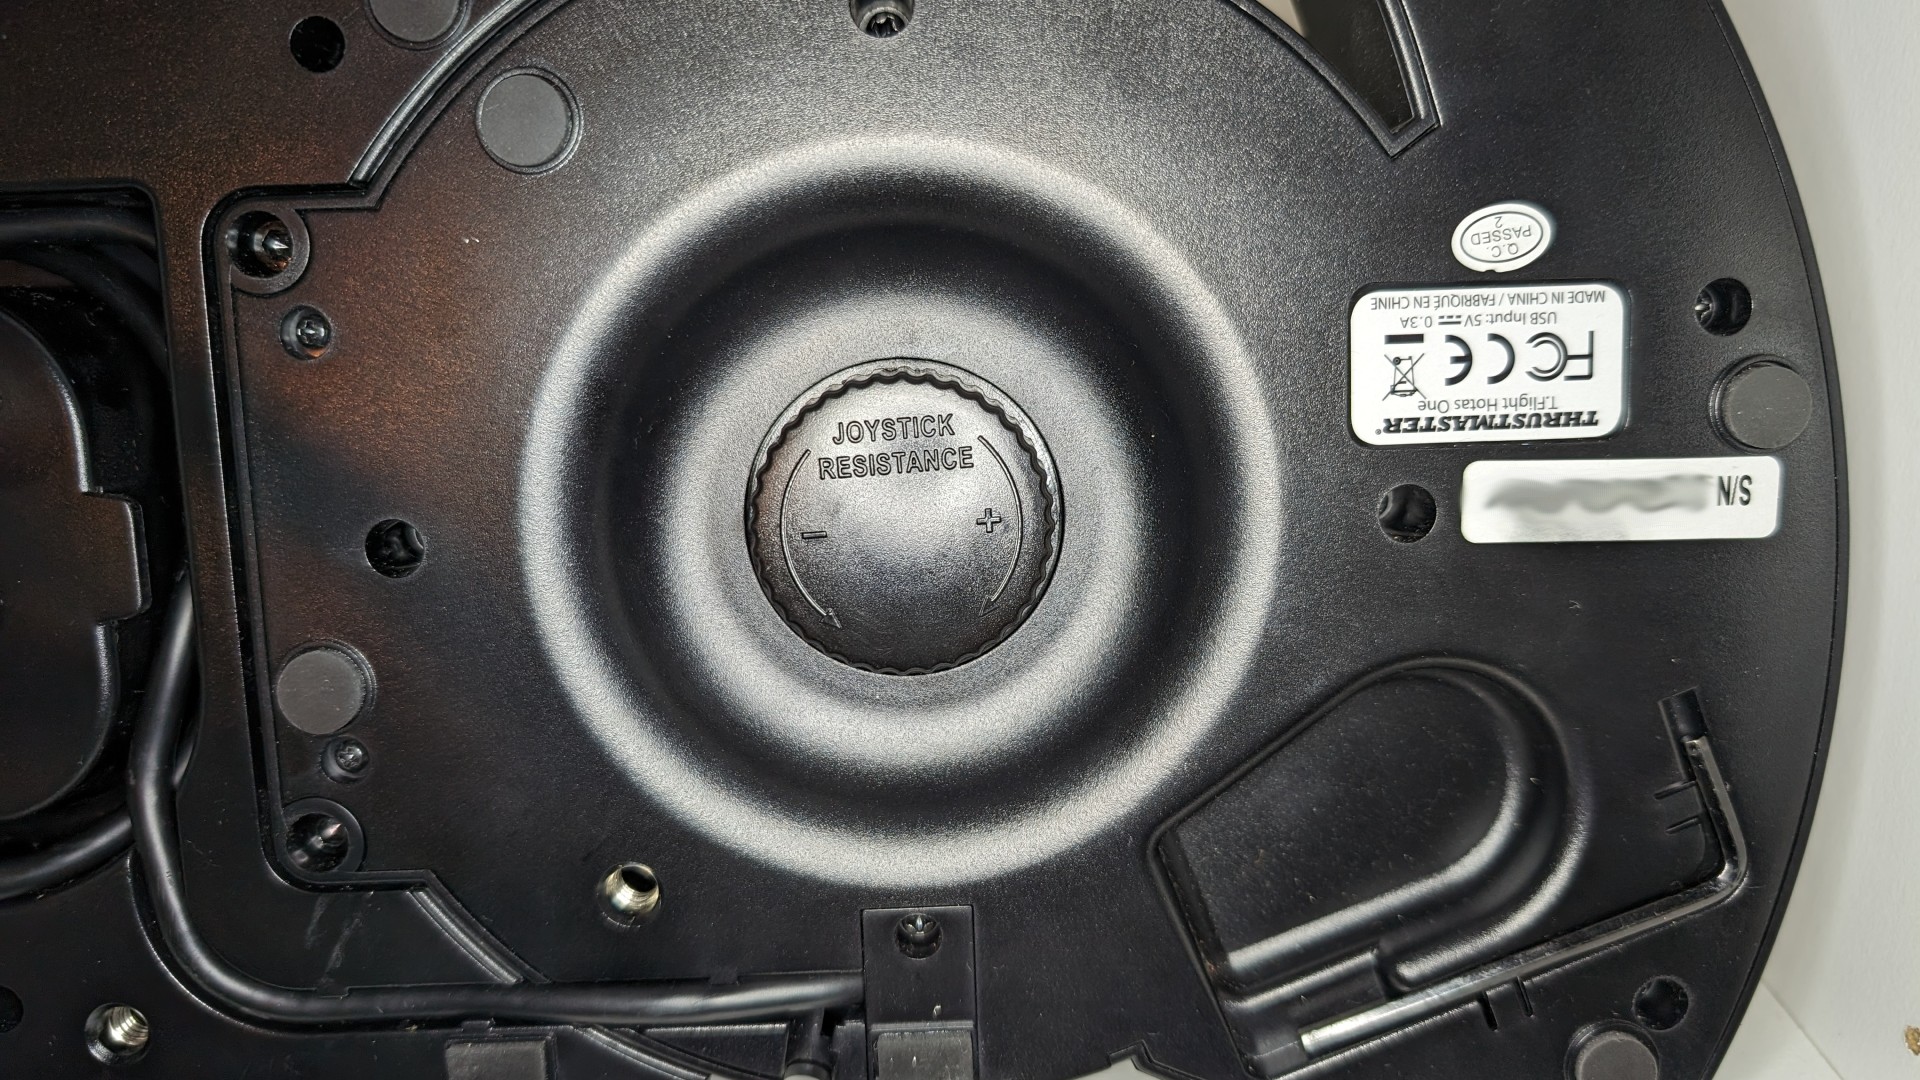 Thrustmaster HOTAS review image showing the joystick resistance portion of the controller.